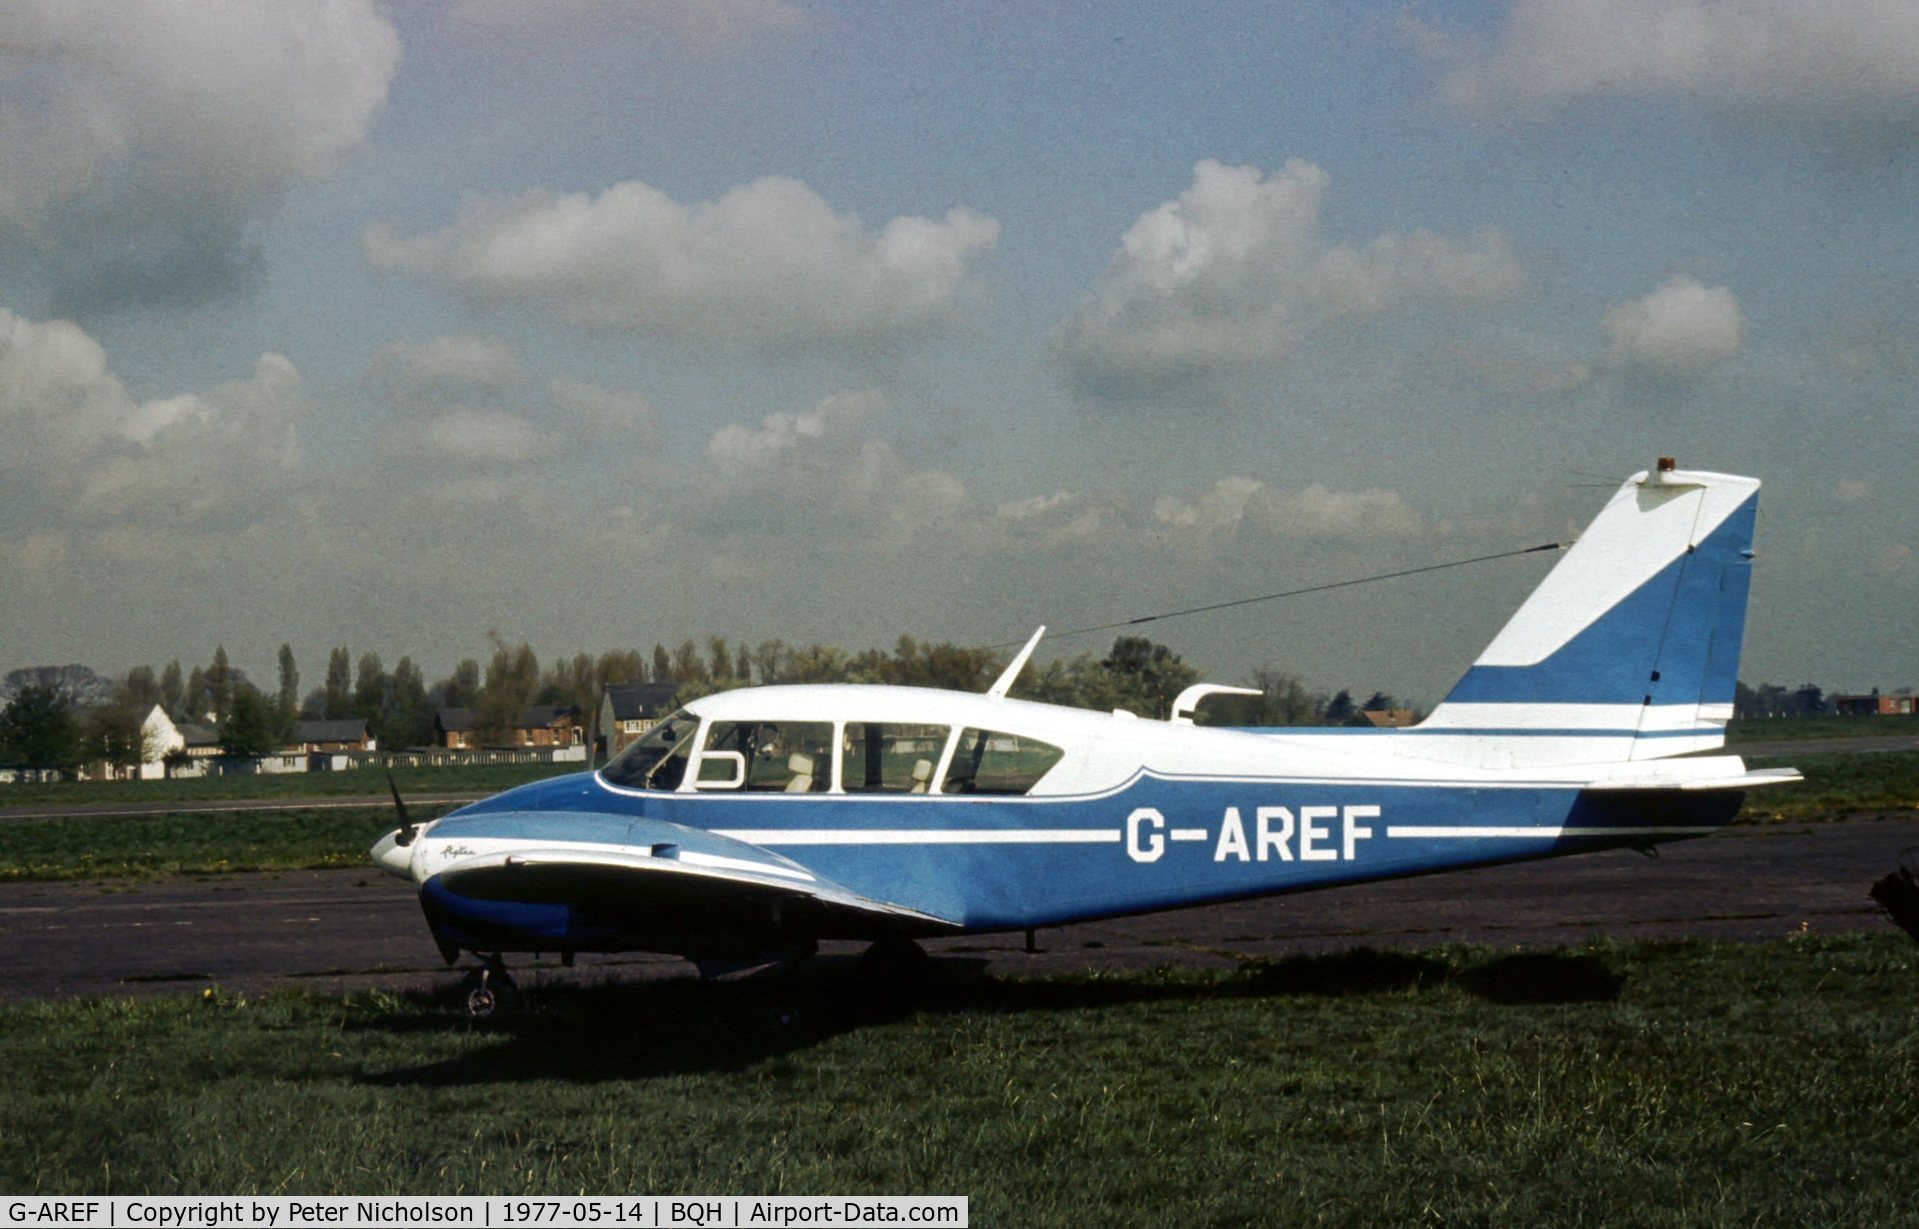 G-AREF, 1960 Piper PA-23-250 Aztec C/N 27-285, This Aztec was present at the 1977 Biggin Hill Air Fair.